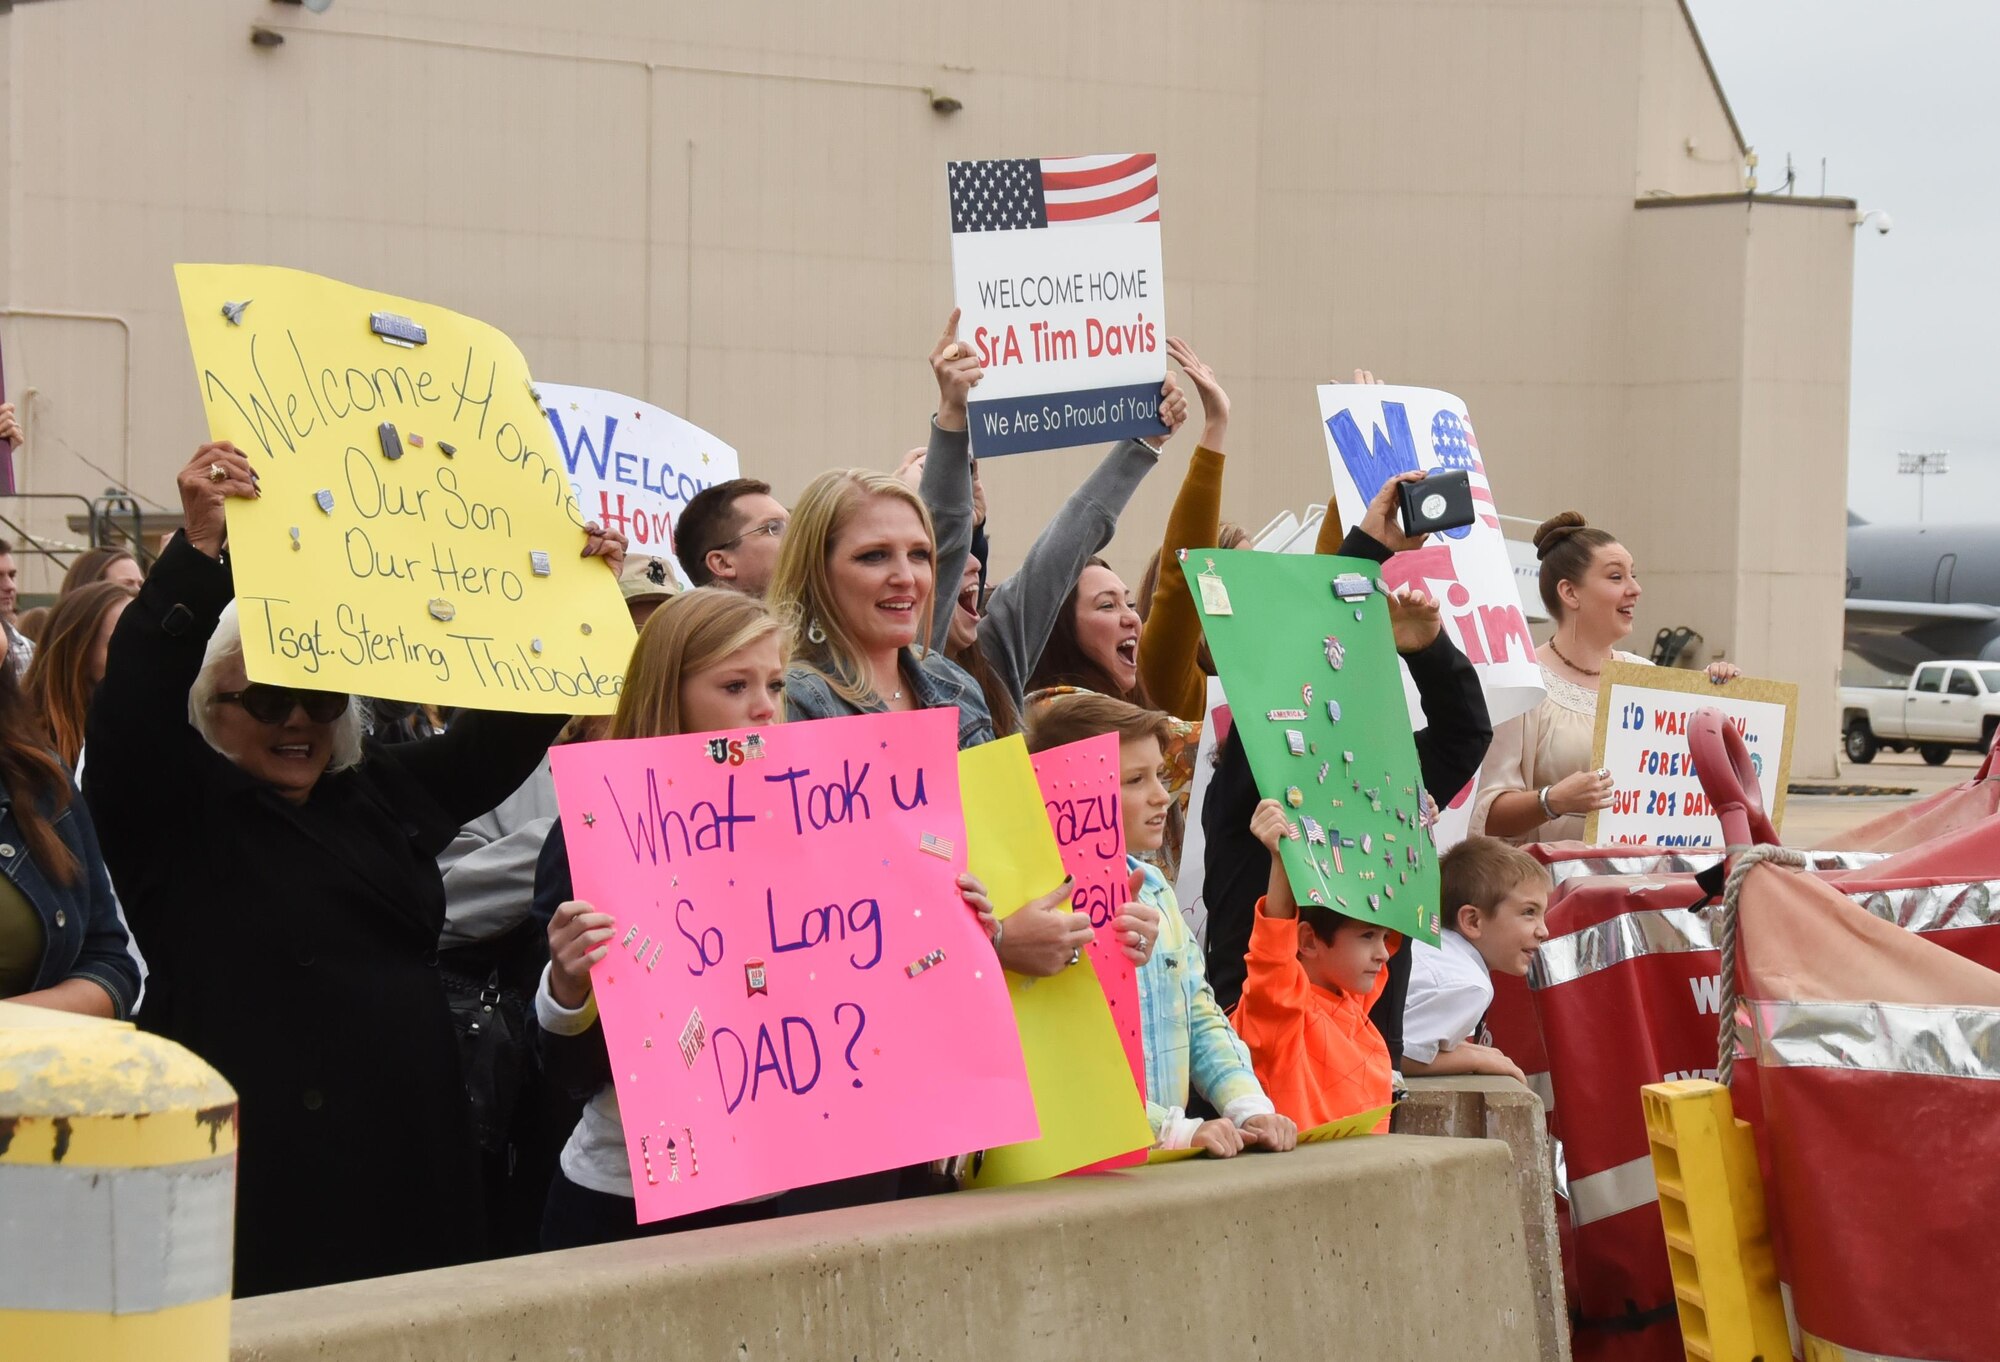 301st Fighter Wing members, families and friends welcome more than 100 Airmen home from Afghanistan Nov. 9, 2016, at Naval Air Station Fort Worth Joint Reserve Base, Texas. Airmen deployed in support of Operation Freedom's Sentinel, which focused on maintaining security and stability in the deployed region. (U.S. Air Force photo by Tech. Sgt. Melissa Harvey)